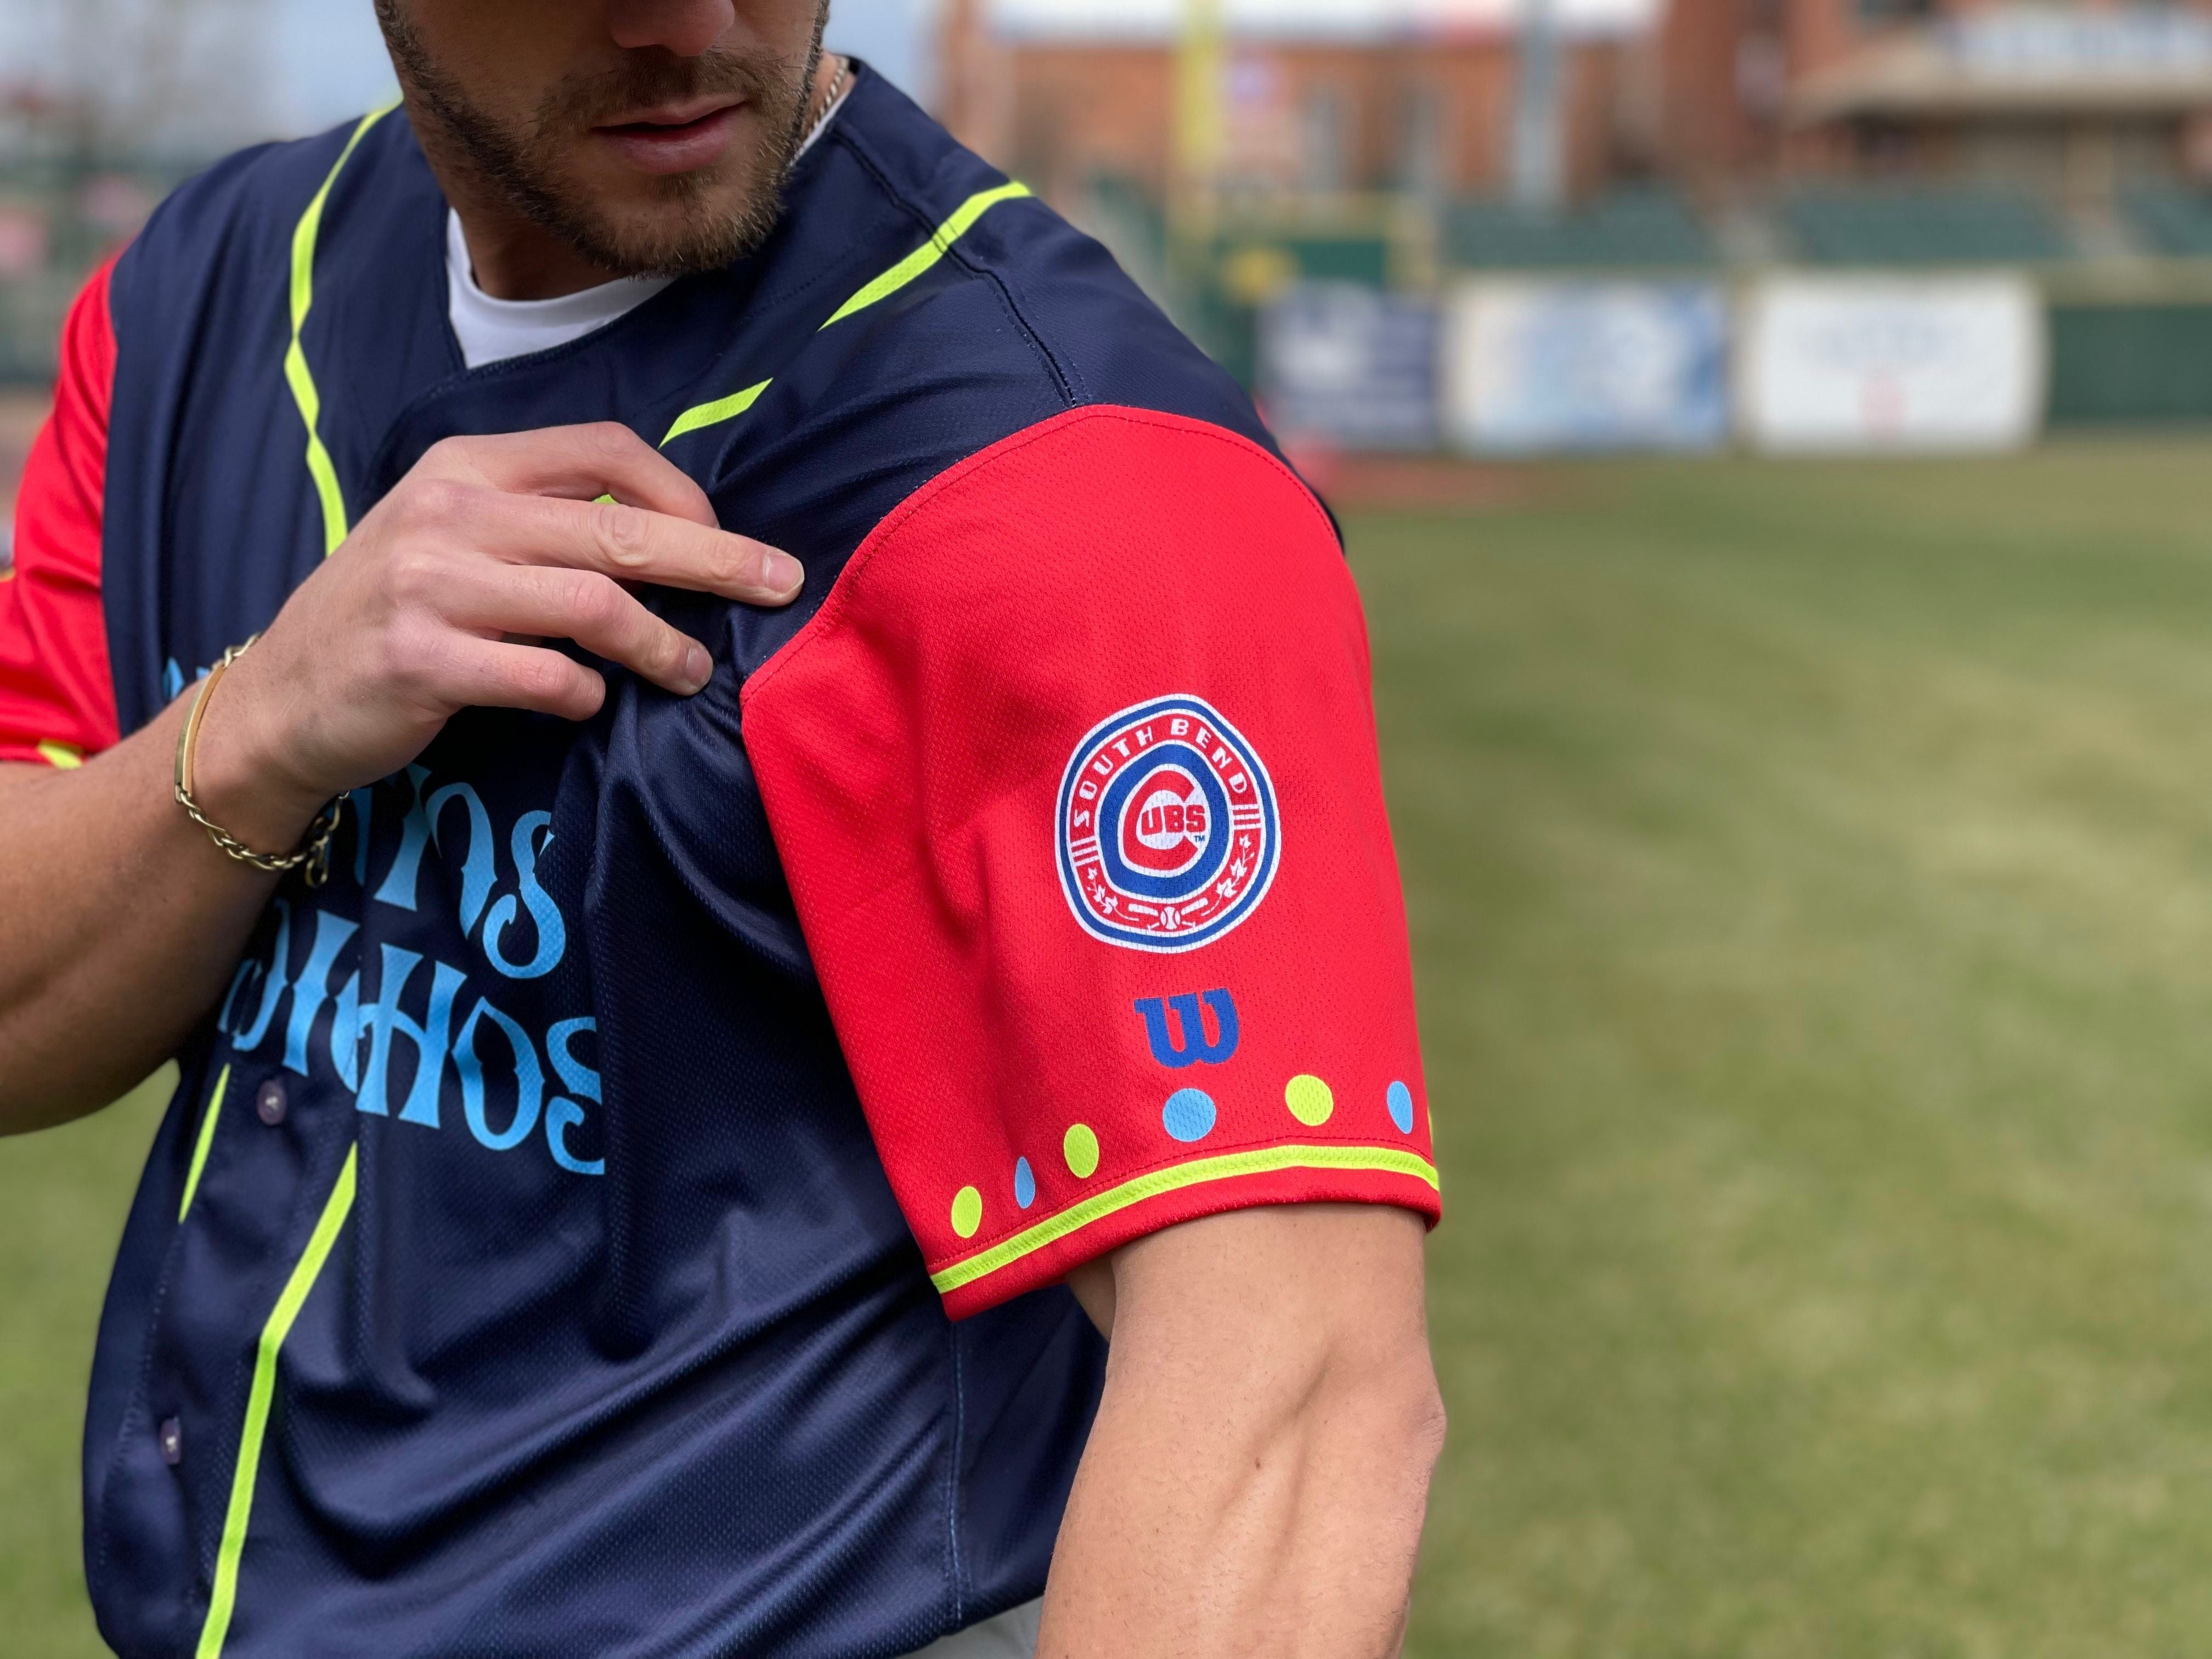 South Bend Cubs Authentic Road Jersey 